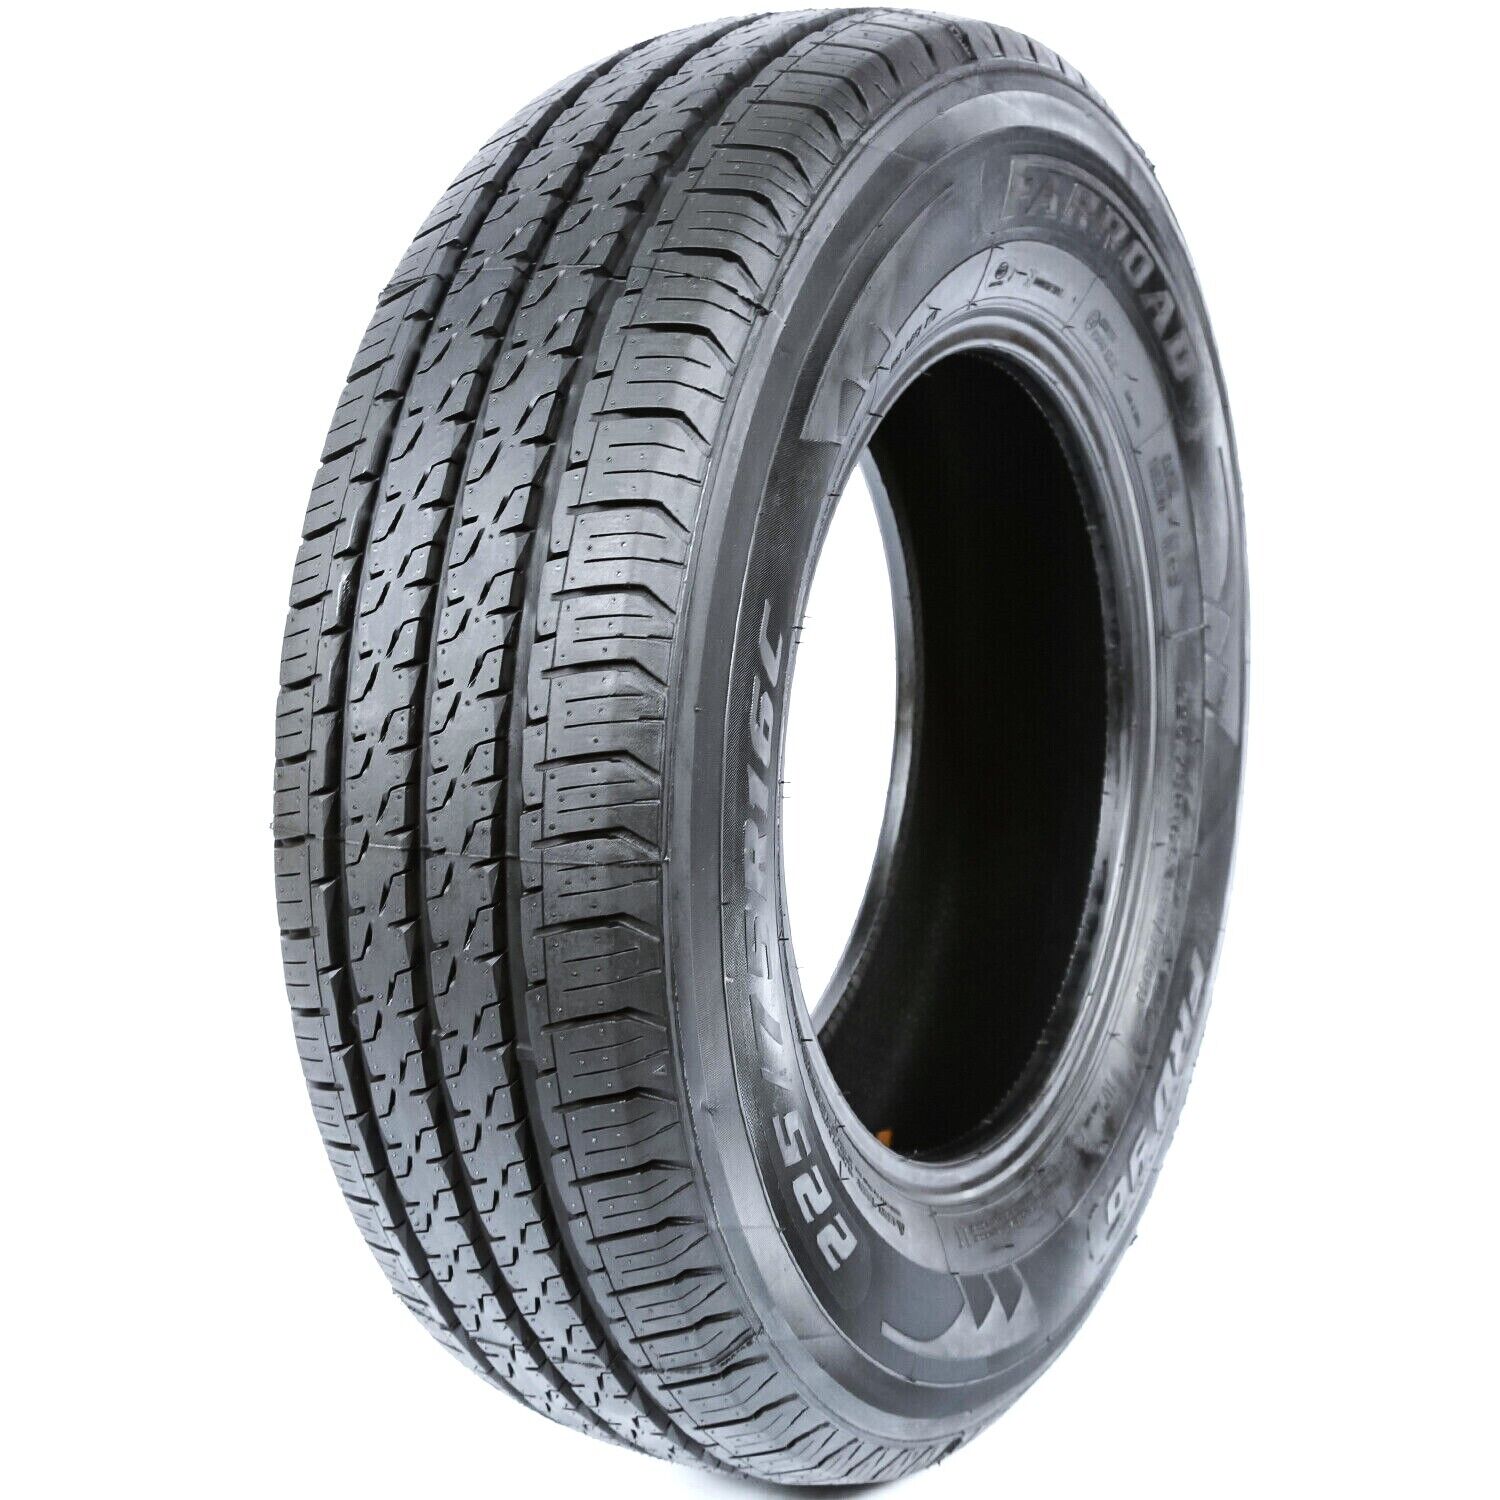 Tire Farroad FRD96 225/75R16C Load E 10 Ply Van Commercial